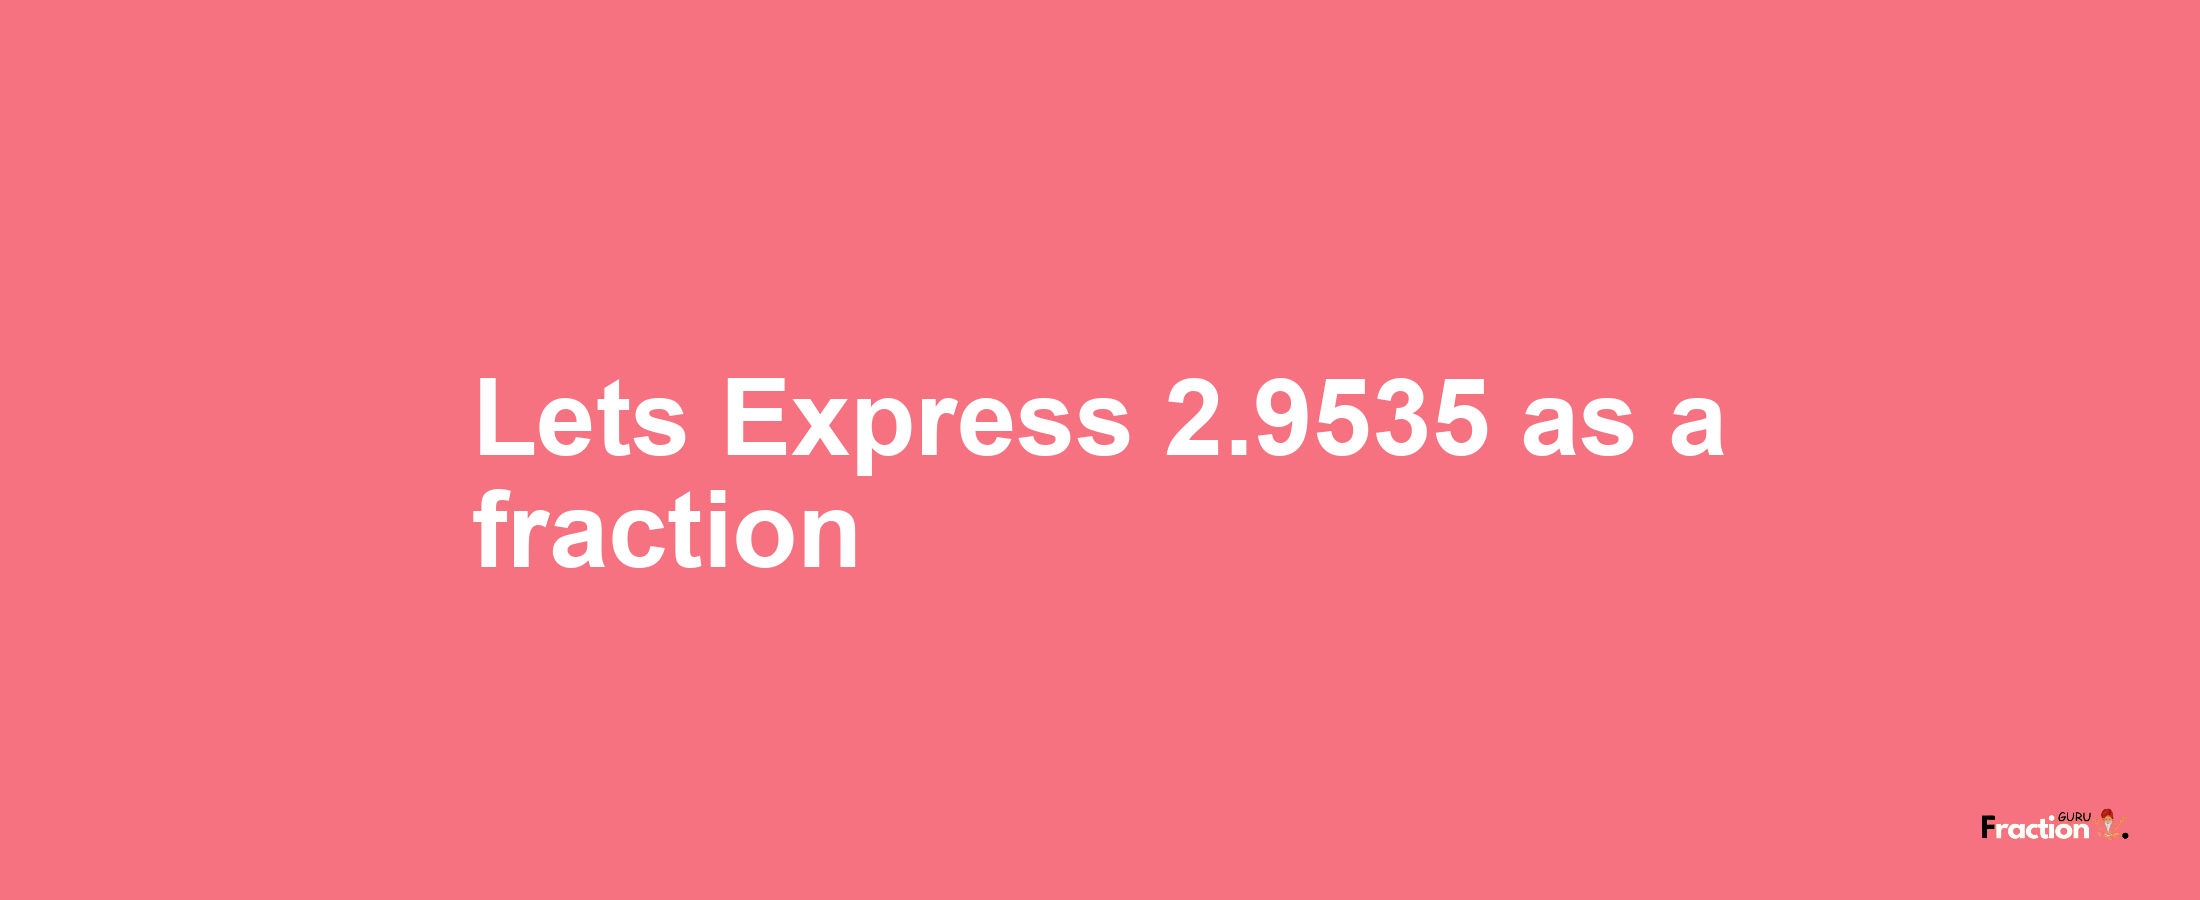 Lets Express 2.9535 as afraction